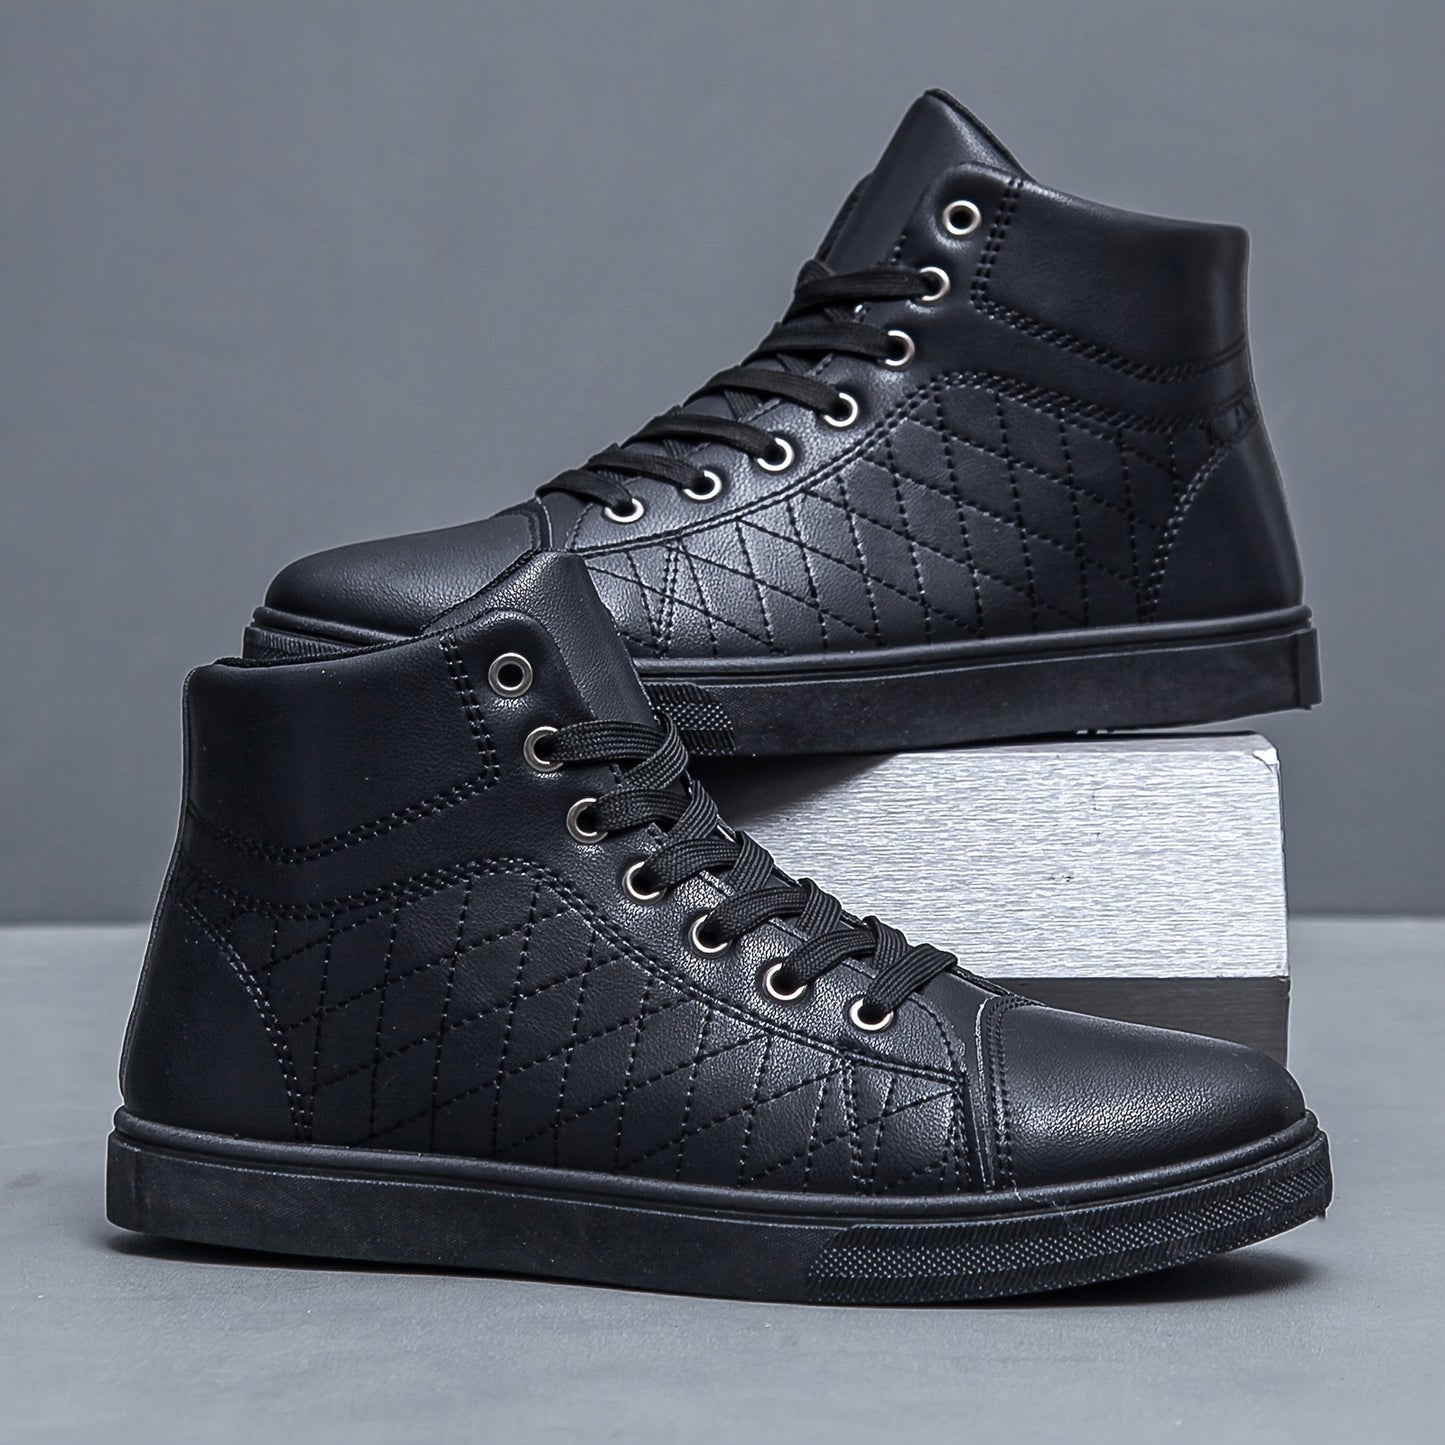 Men's Solid Ankle Boots - Comfy Non-Slip Soft Sole Sneakers